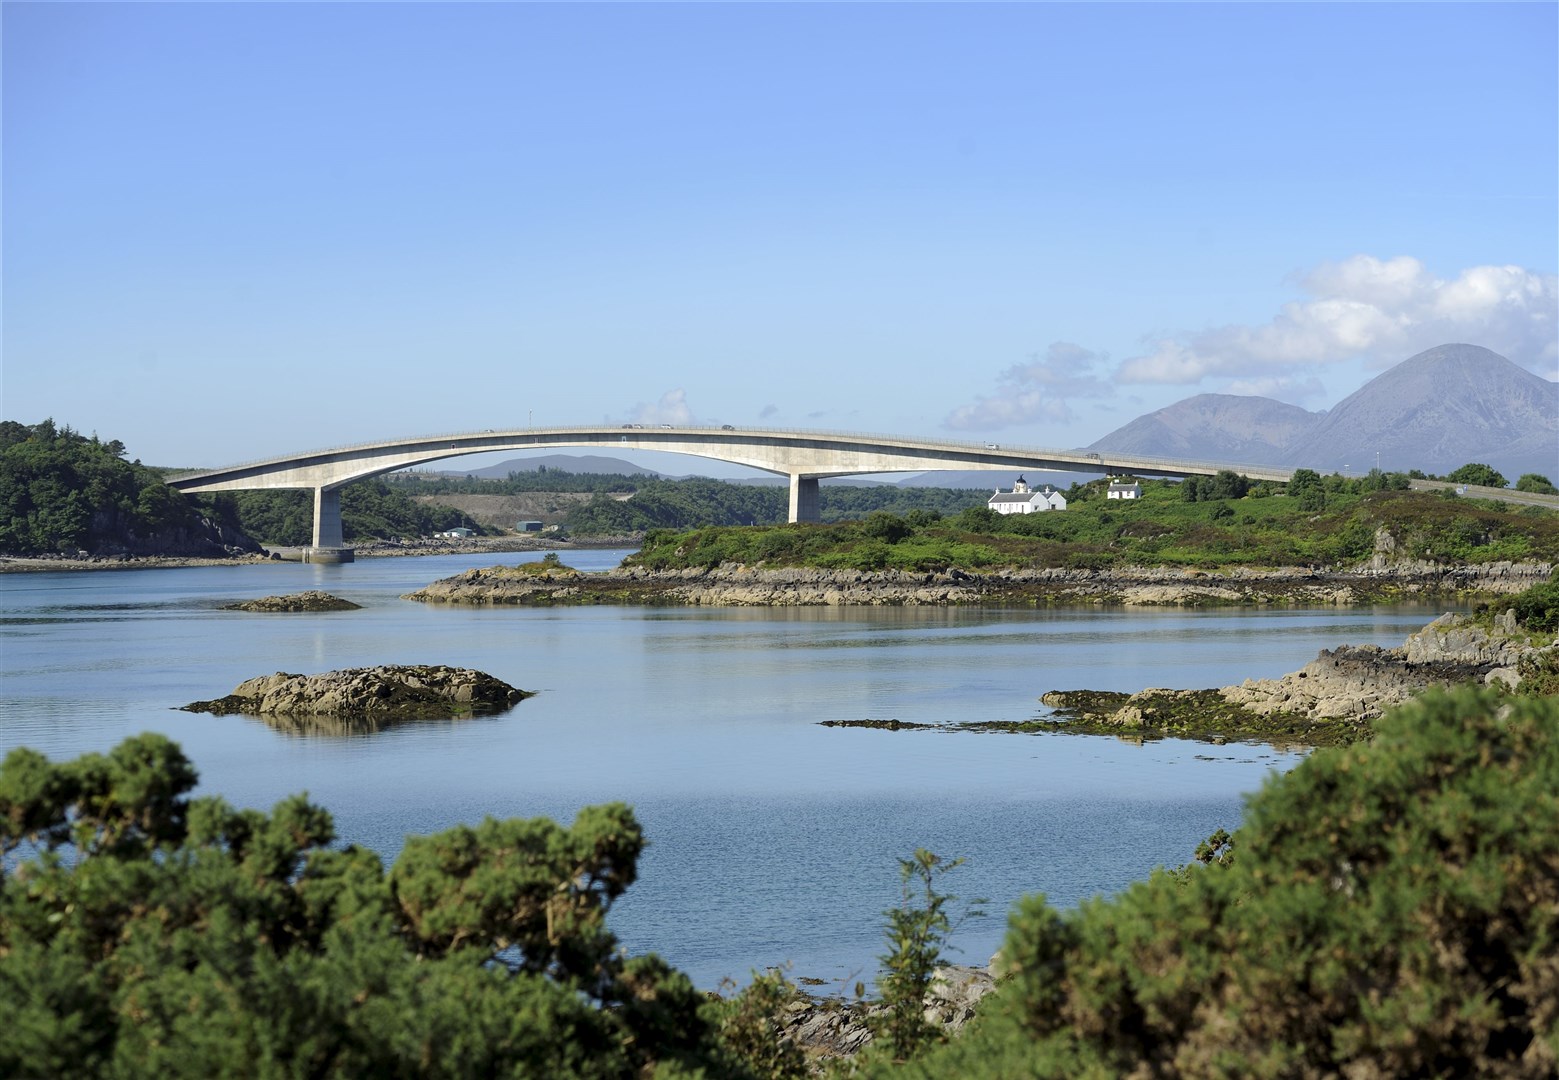 The Skye Bridge forms part of the A87. Picture: Gary Anthony